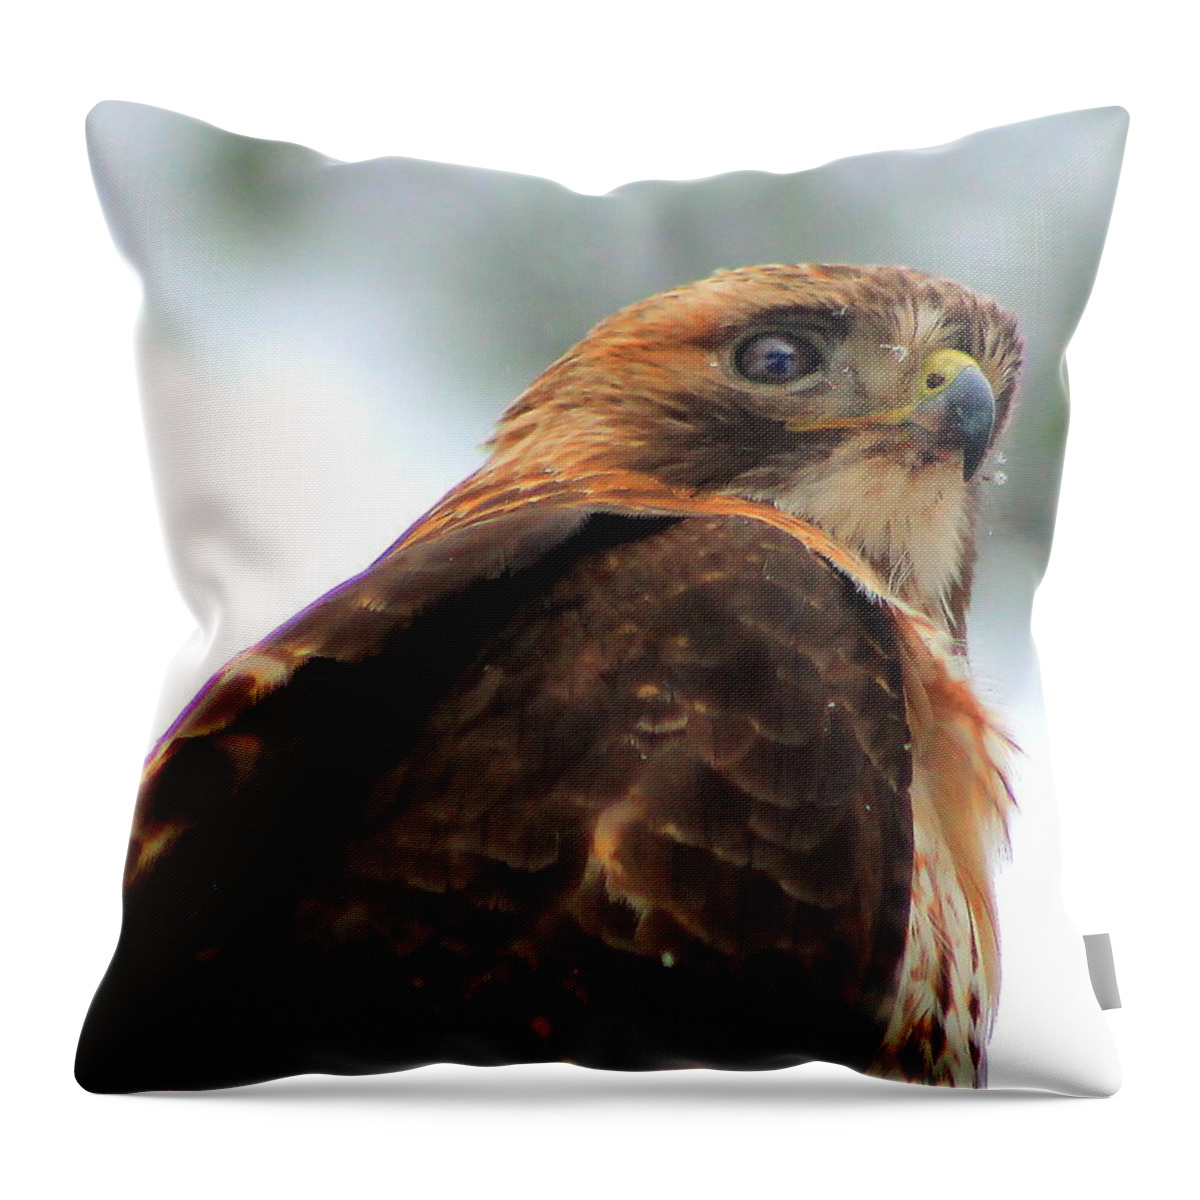 Hawk Throw Pillow featuring the photograph Hawk by Bruce Patrick Smith